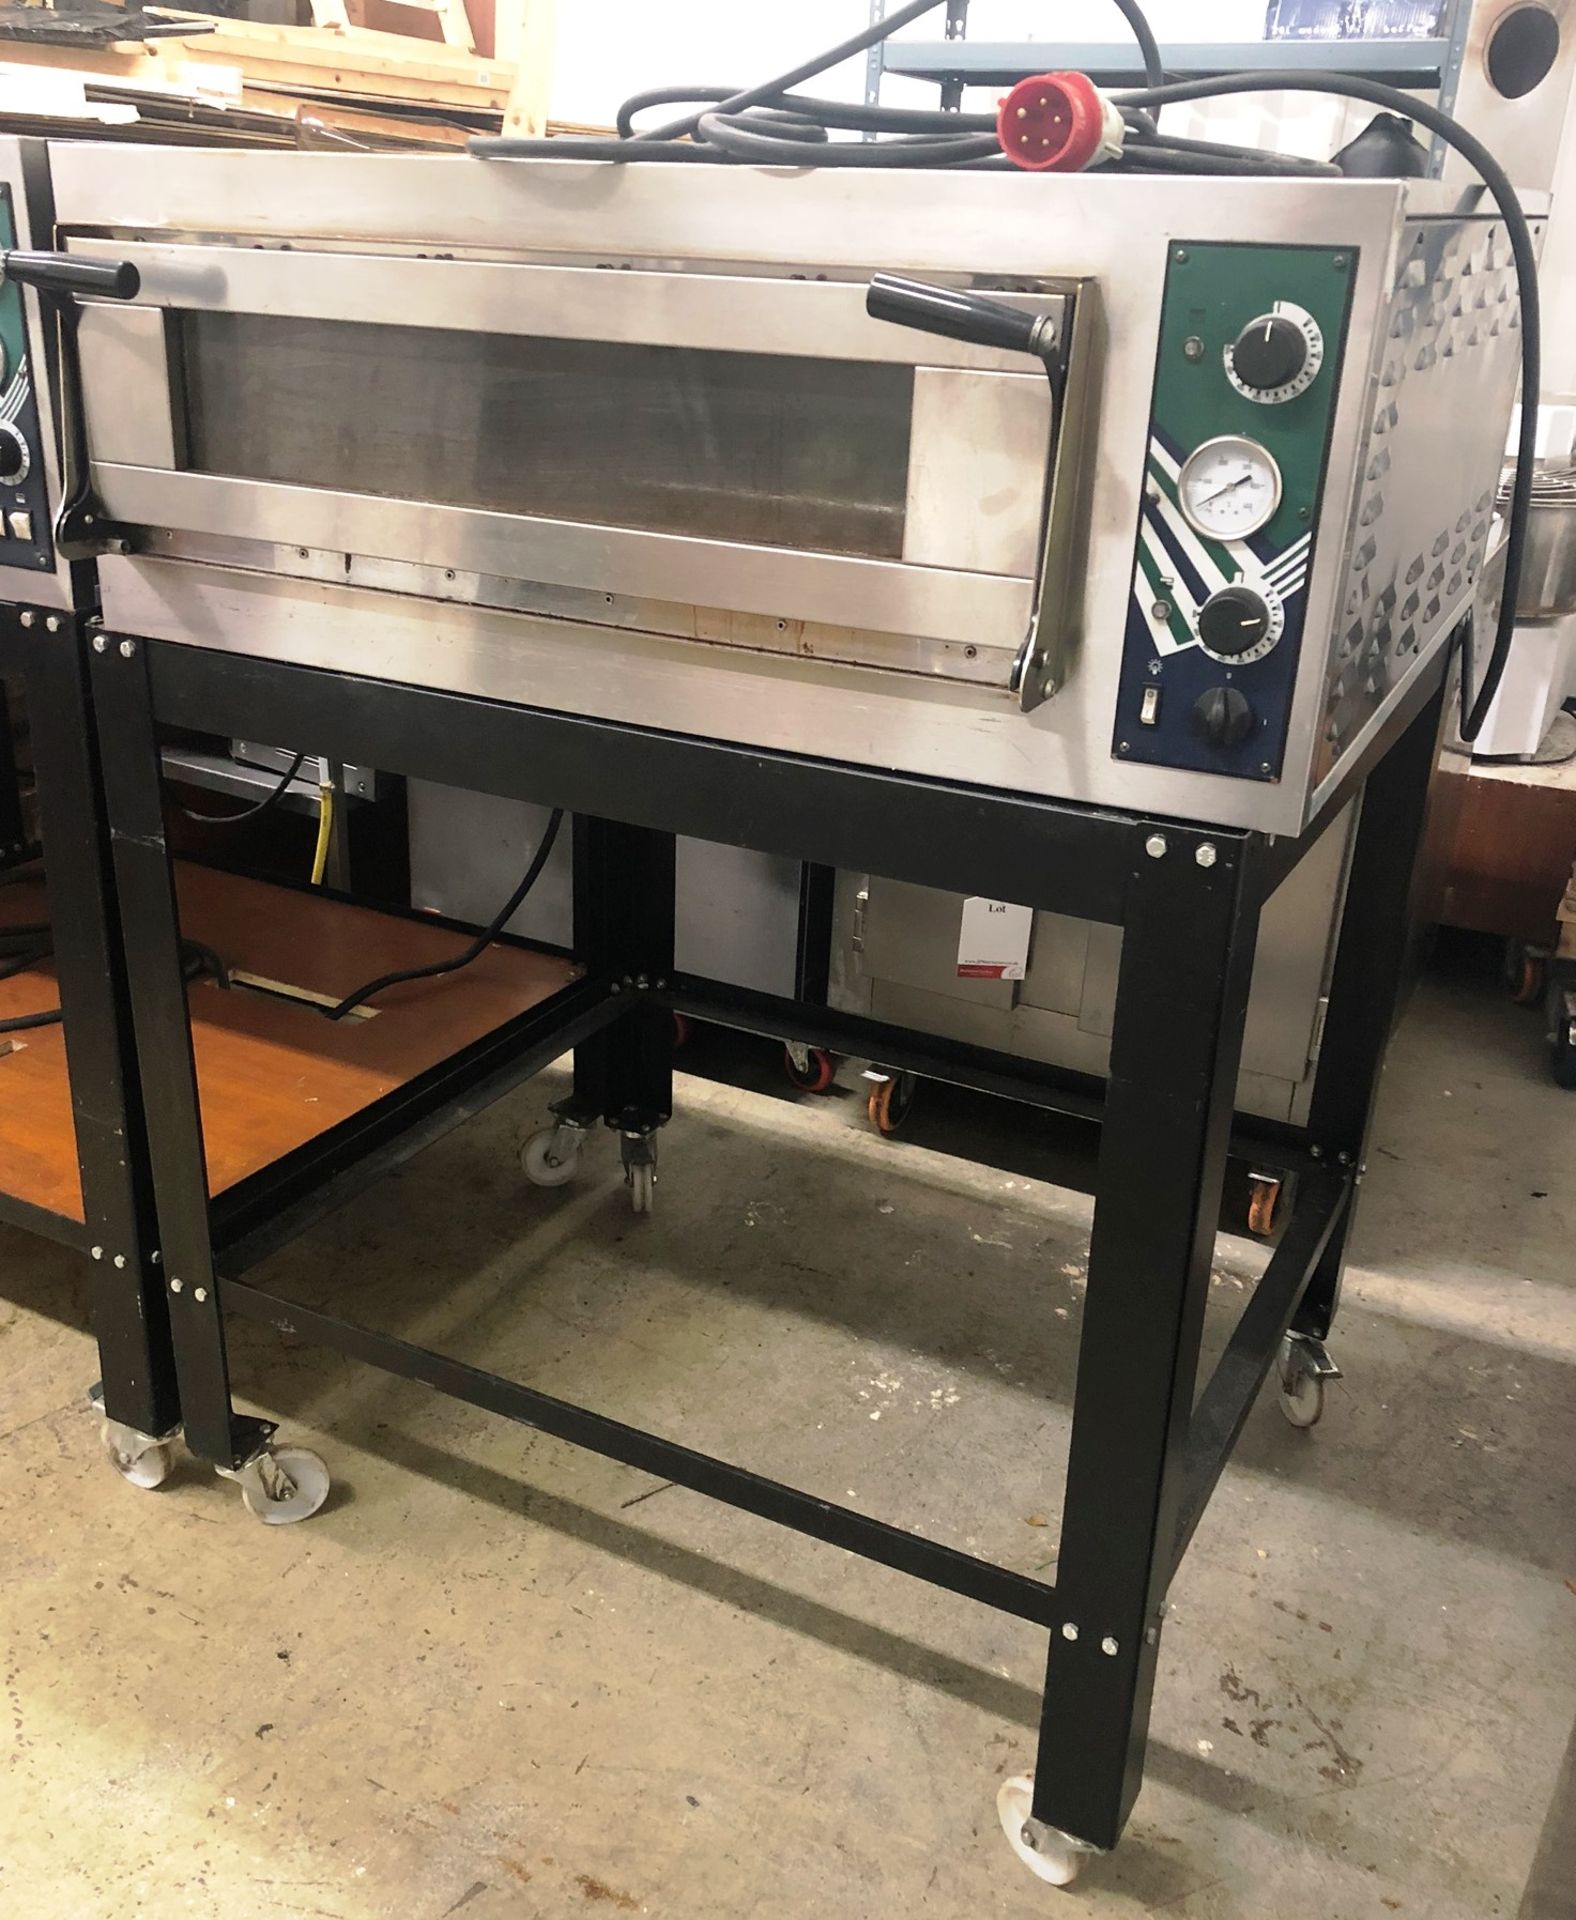 Hostek Dual 4 New Wide Single Deck Pizza Oven on Mobile Stand | YOM: 2018 - Image 3 of 6